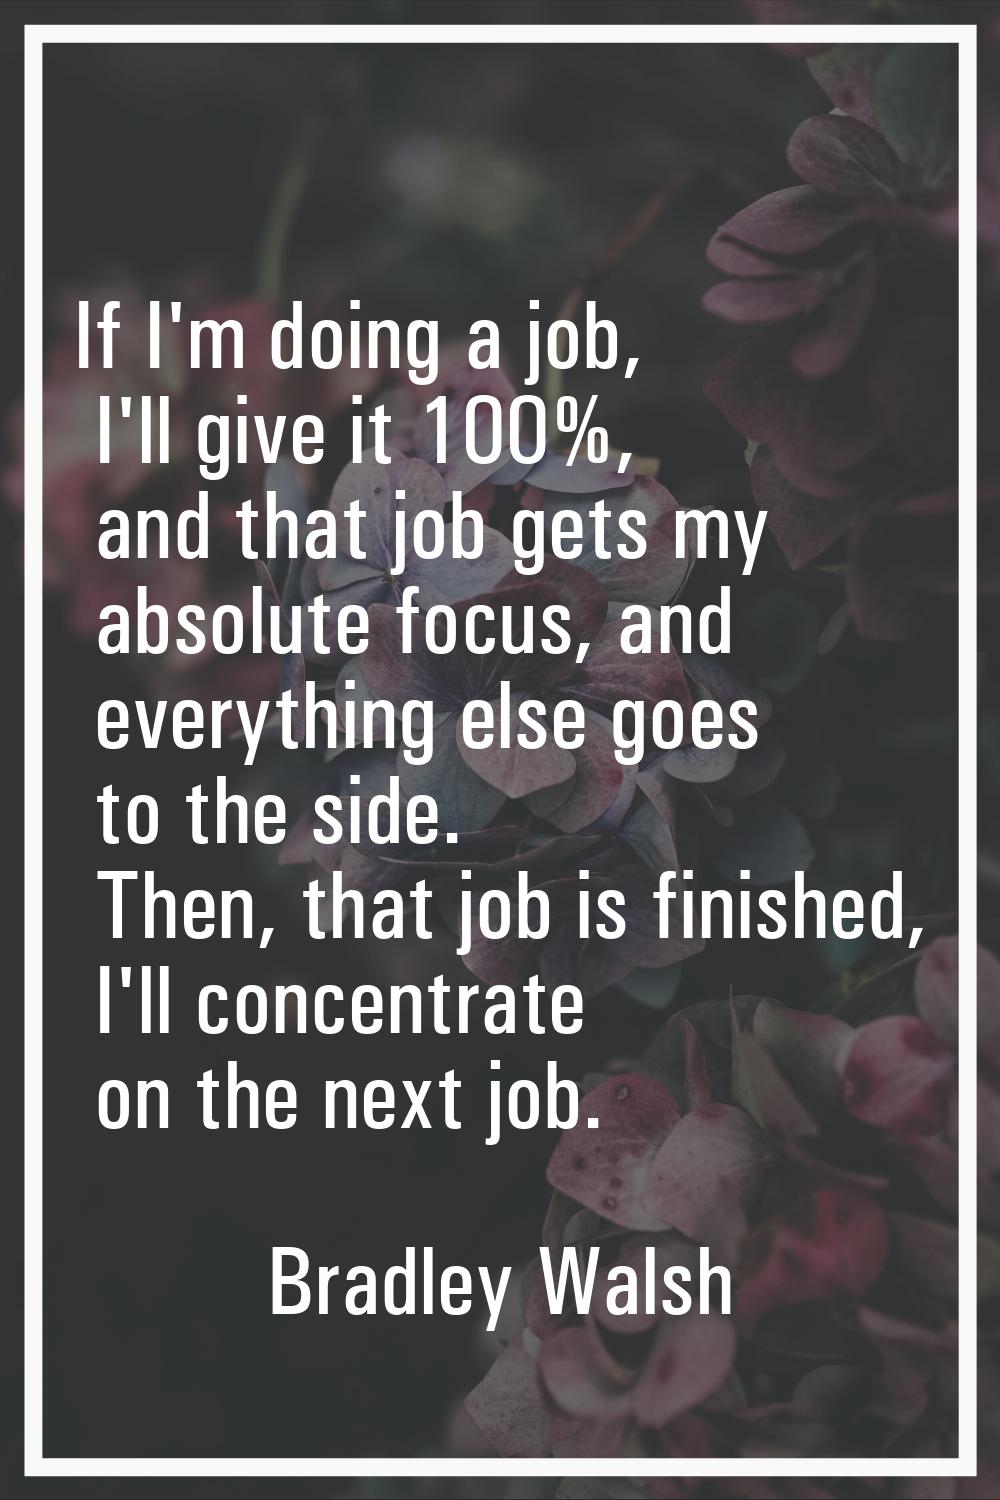 If I'm doing a job, I'll give it 100%, and that job gets my absolute focus, and everything else goe